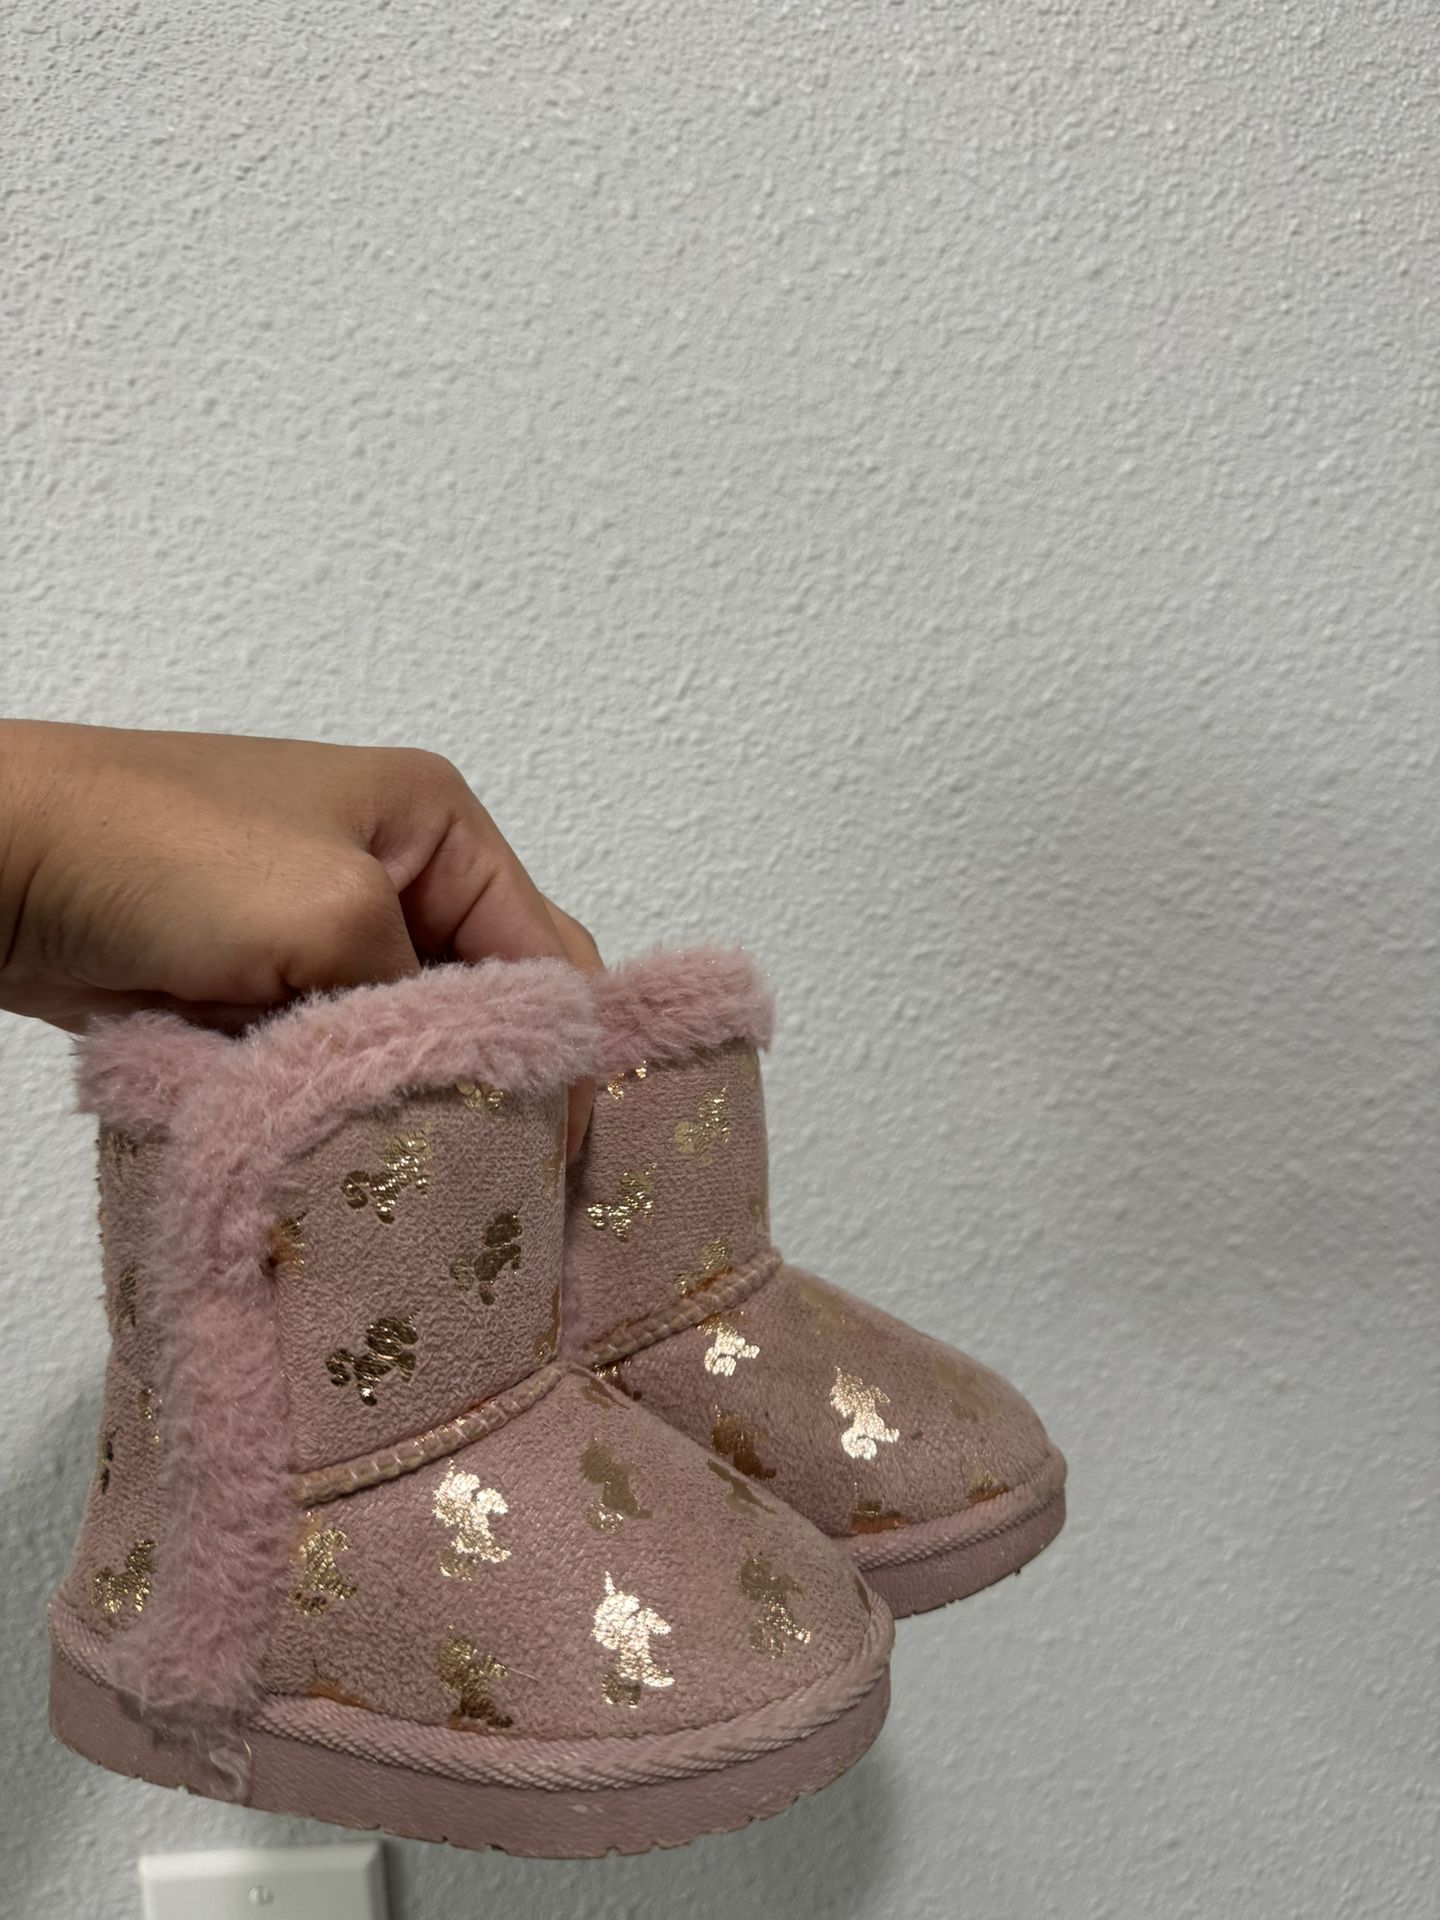 Toddler Pink Boots Size 5